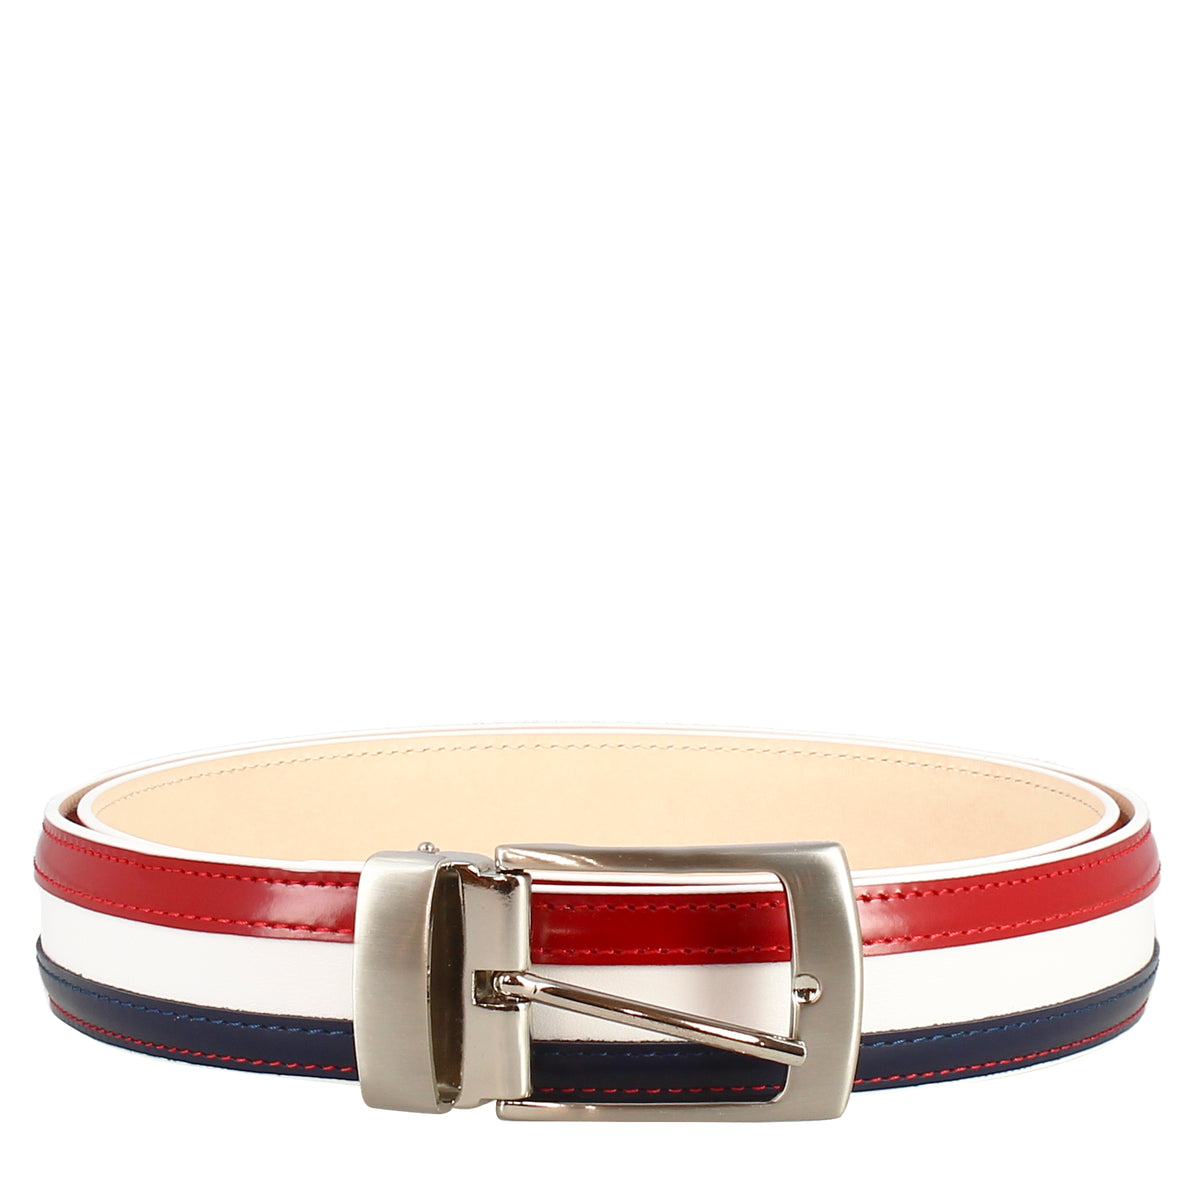 Handmade men's belt in tricolour leather and metal buckle